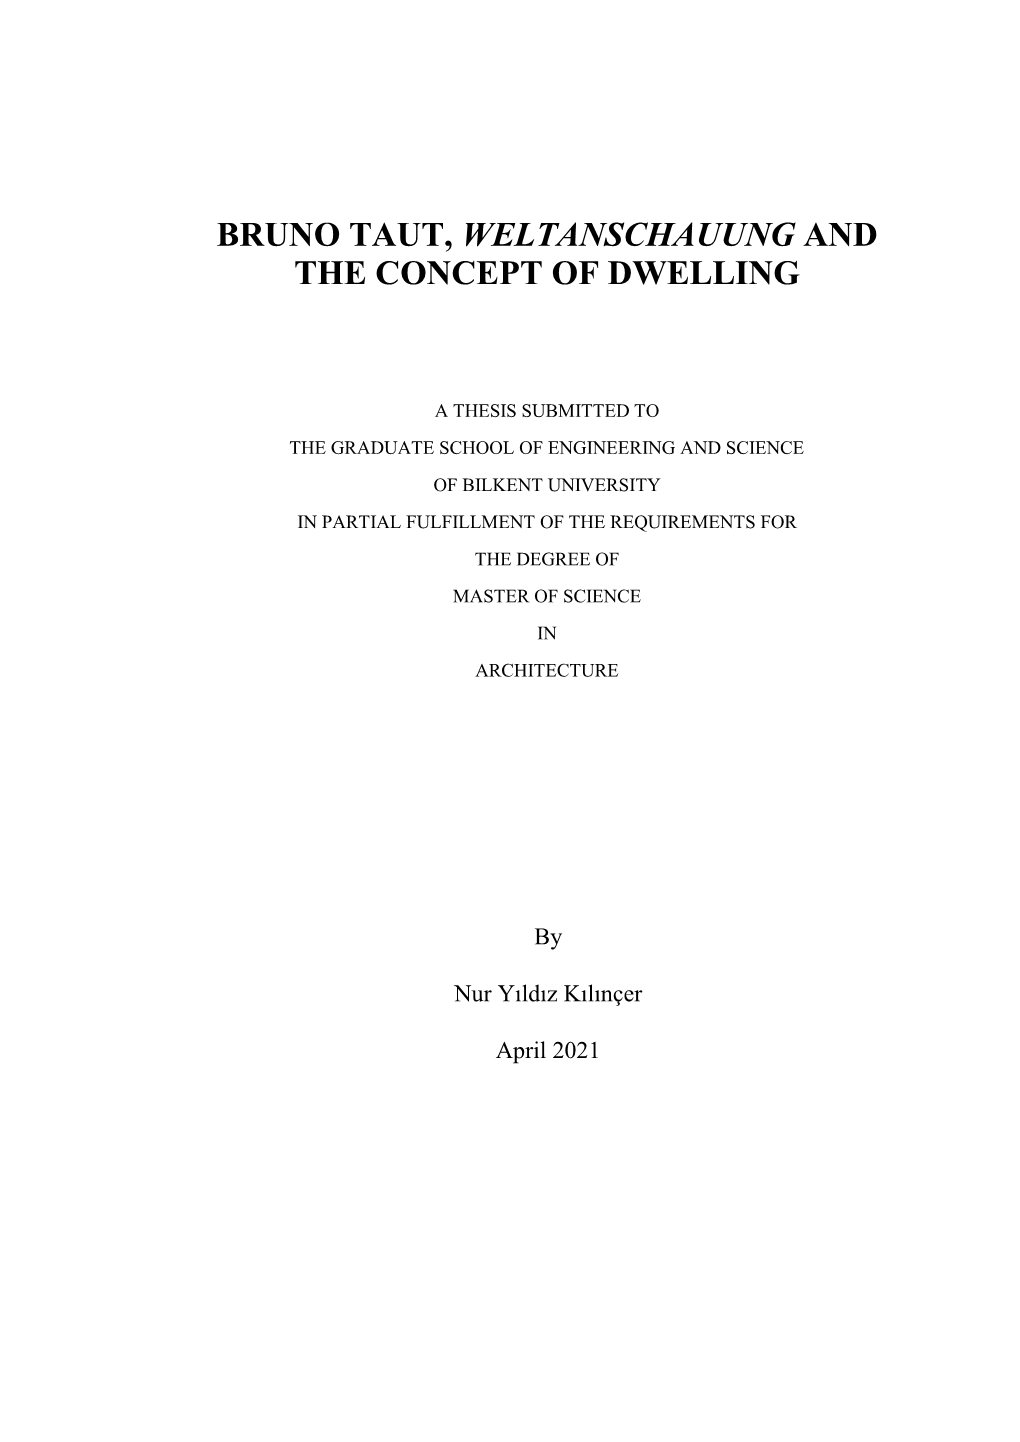 Bruno Taut, Weltanschauung and the Concept of Dwelling